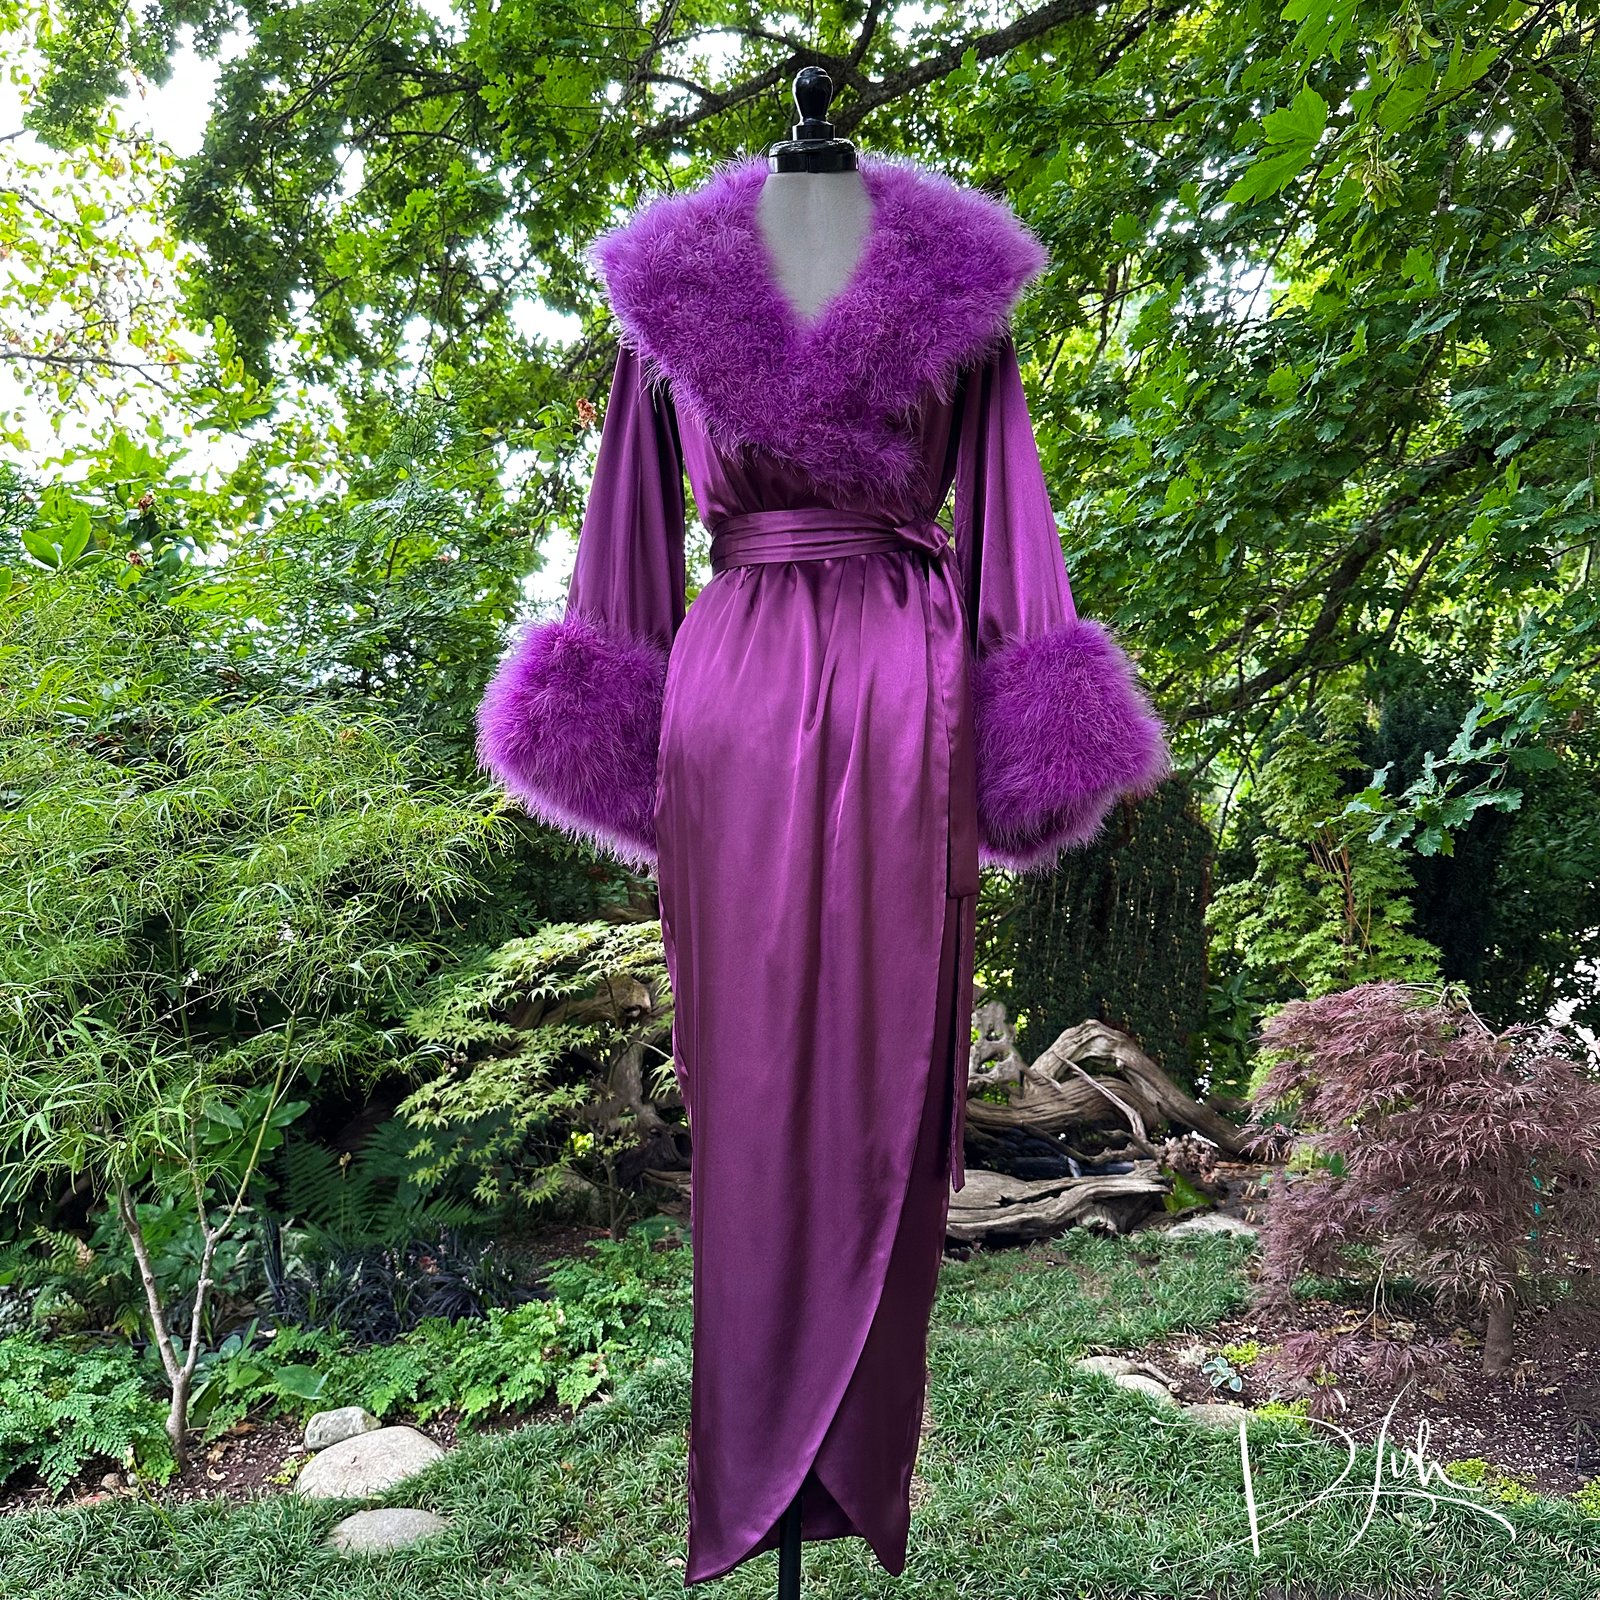 Buy Long Bath Robe for Womens Plush Soft Fleece Bathrobes Nightgown Ladies  Pajamas Sleepwear Housecoat Purple LargeXLarge Online at Low Prices in  India  Amazonin